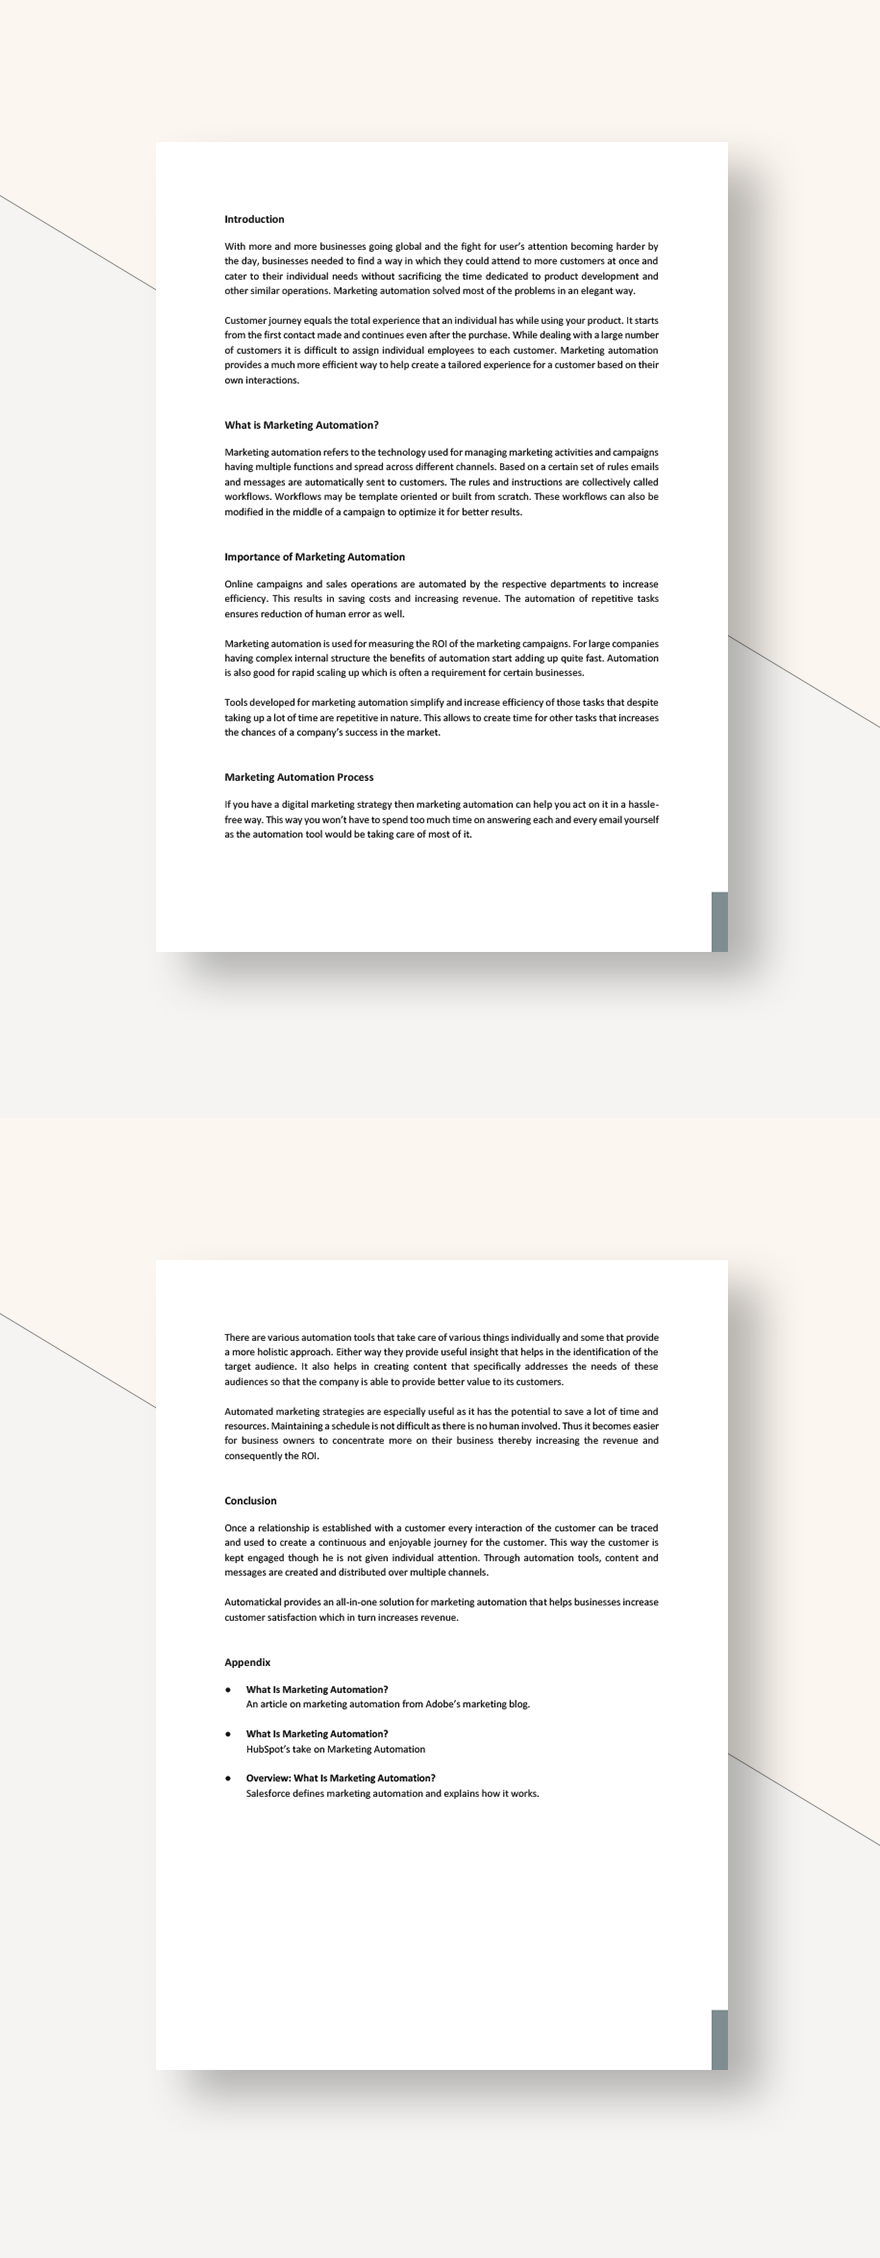 Marketing Automation White Paper Template